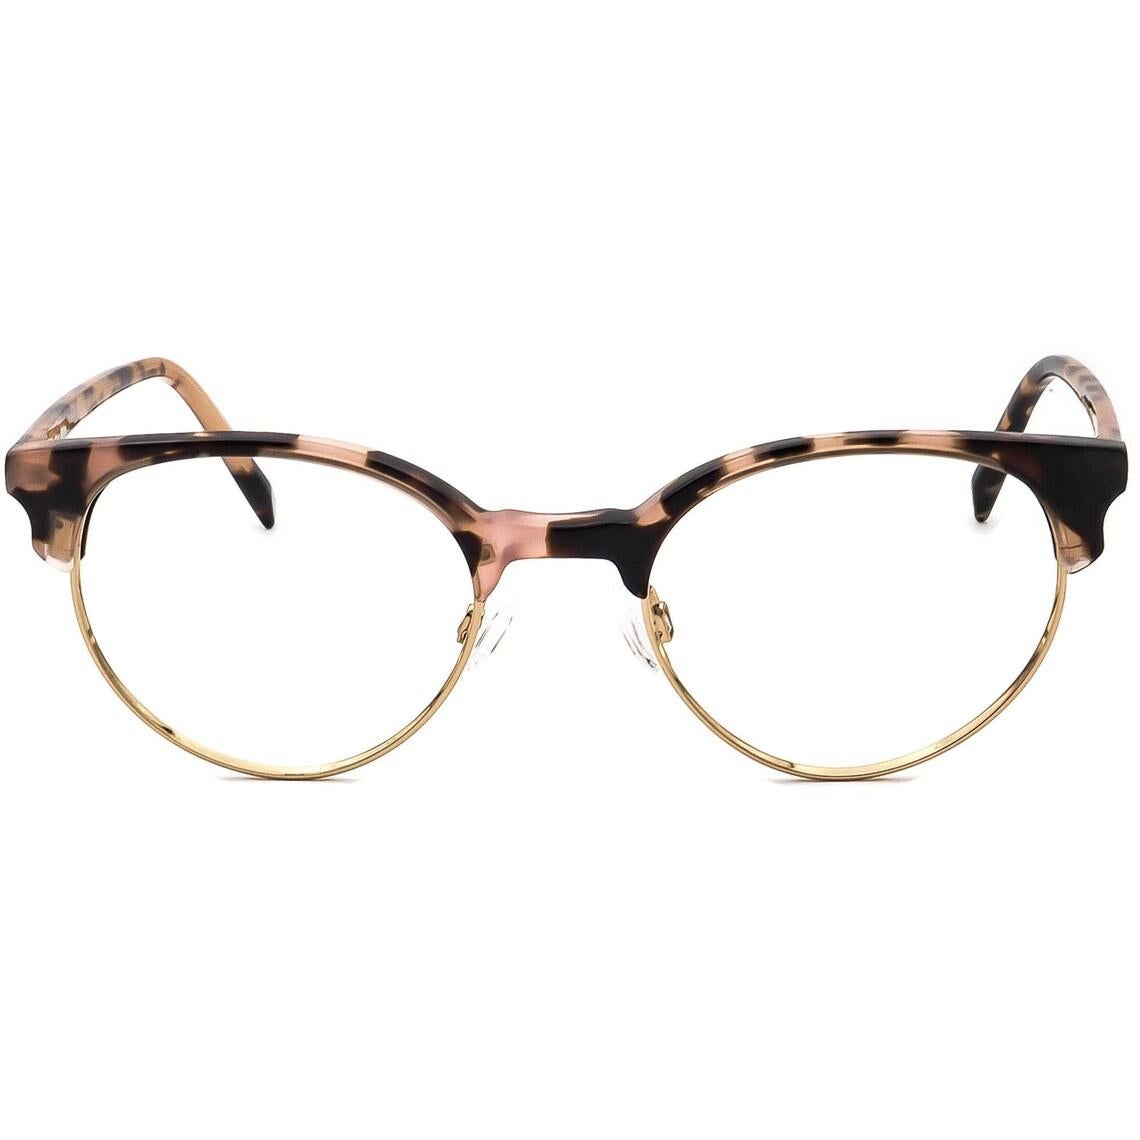 Warby Parker Eyeglasses Carey 1286 Pink Tortoise/Gold Round Frame 49[]20 140 In Excellent Condition For Sale In New York, NY